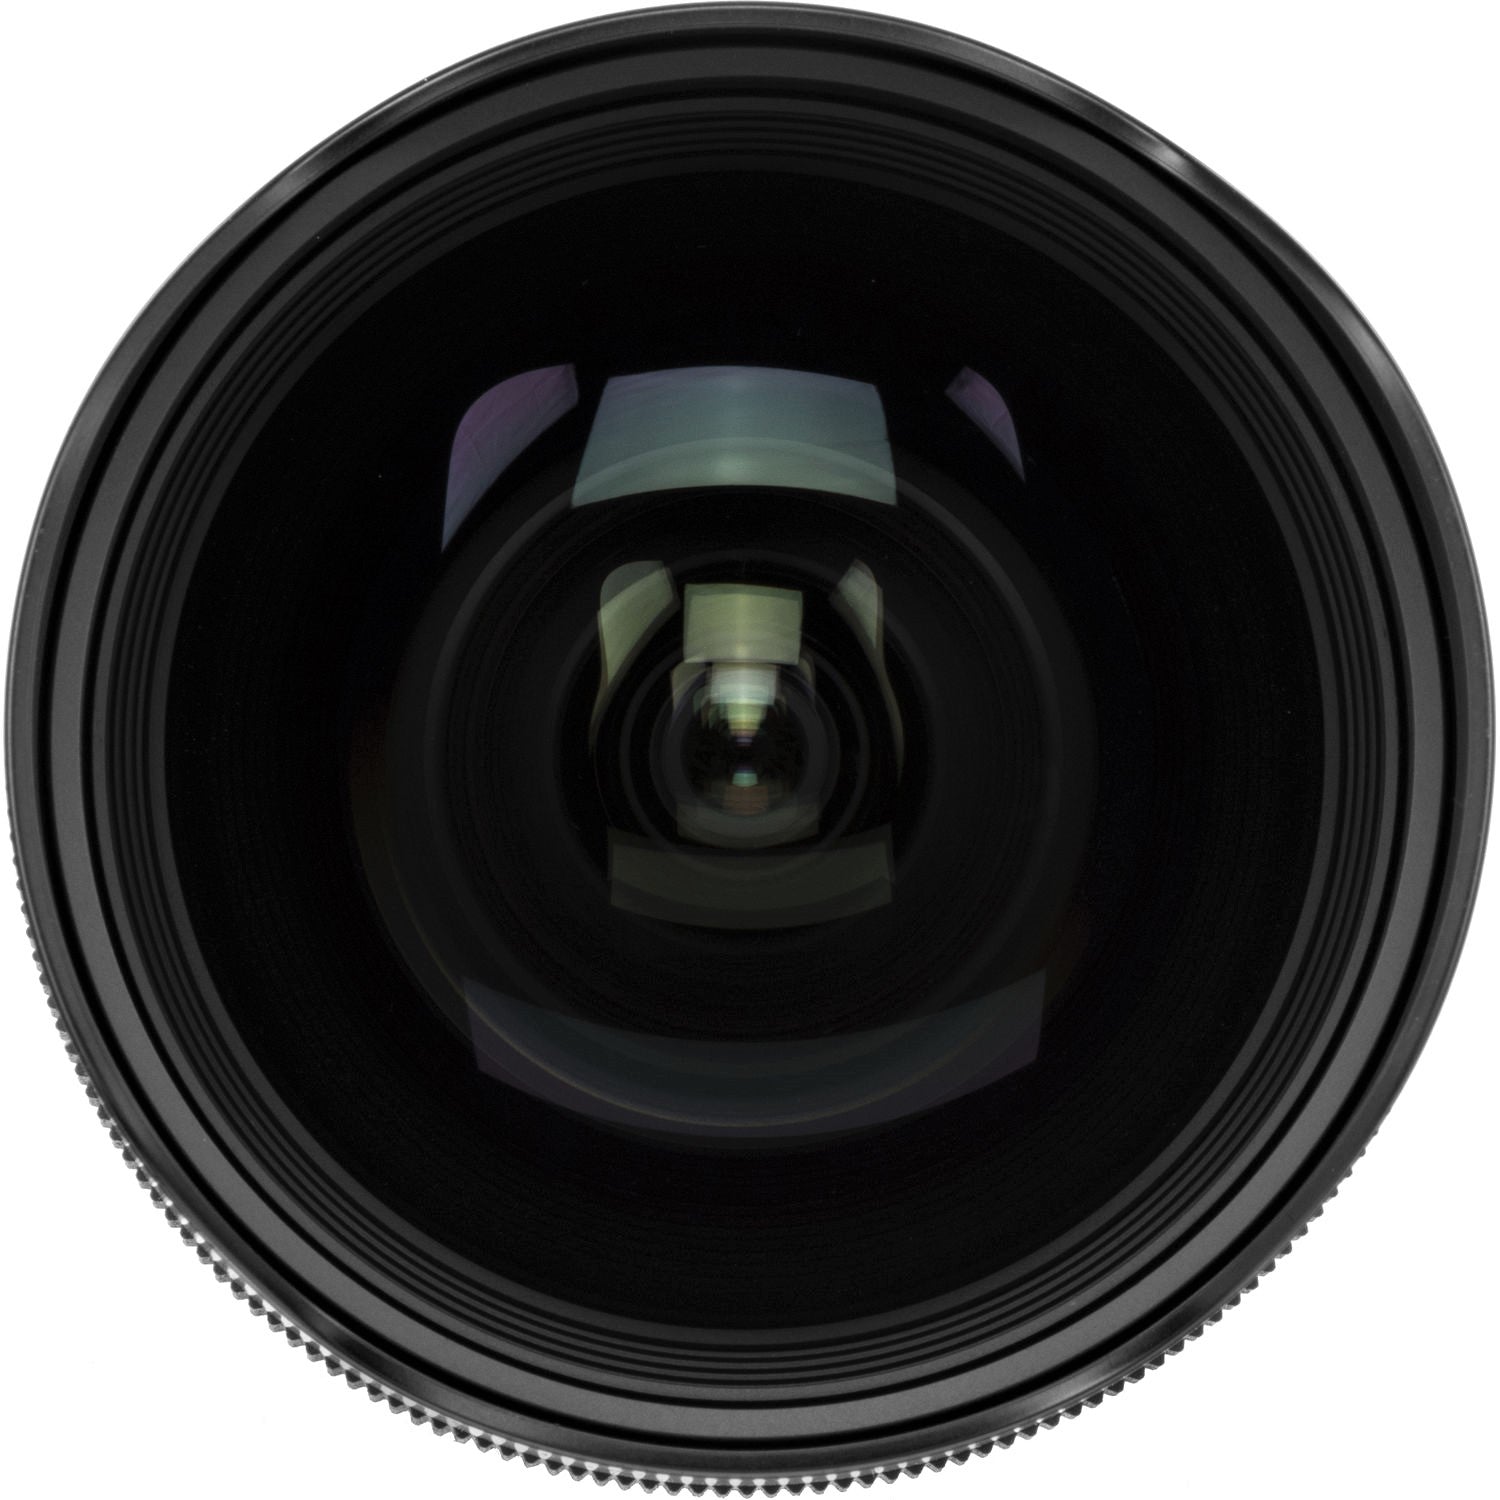 Sigma 14-24mm F2.8 DG HSM Art Lens for Sigma SA in a Front Close-Up View